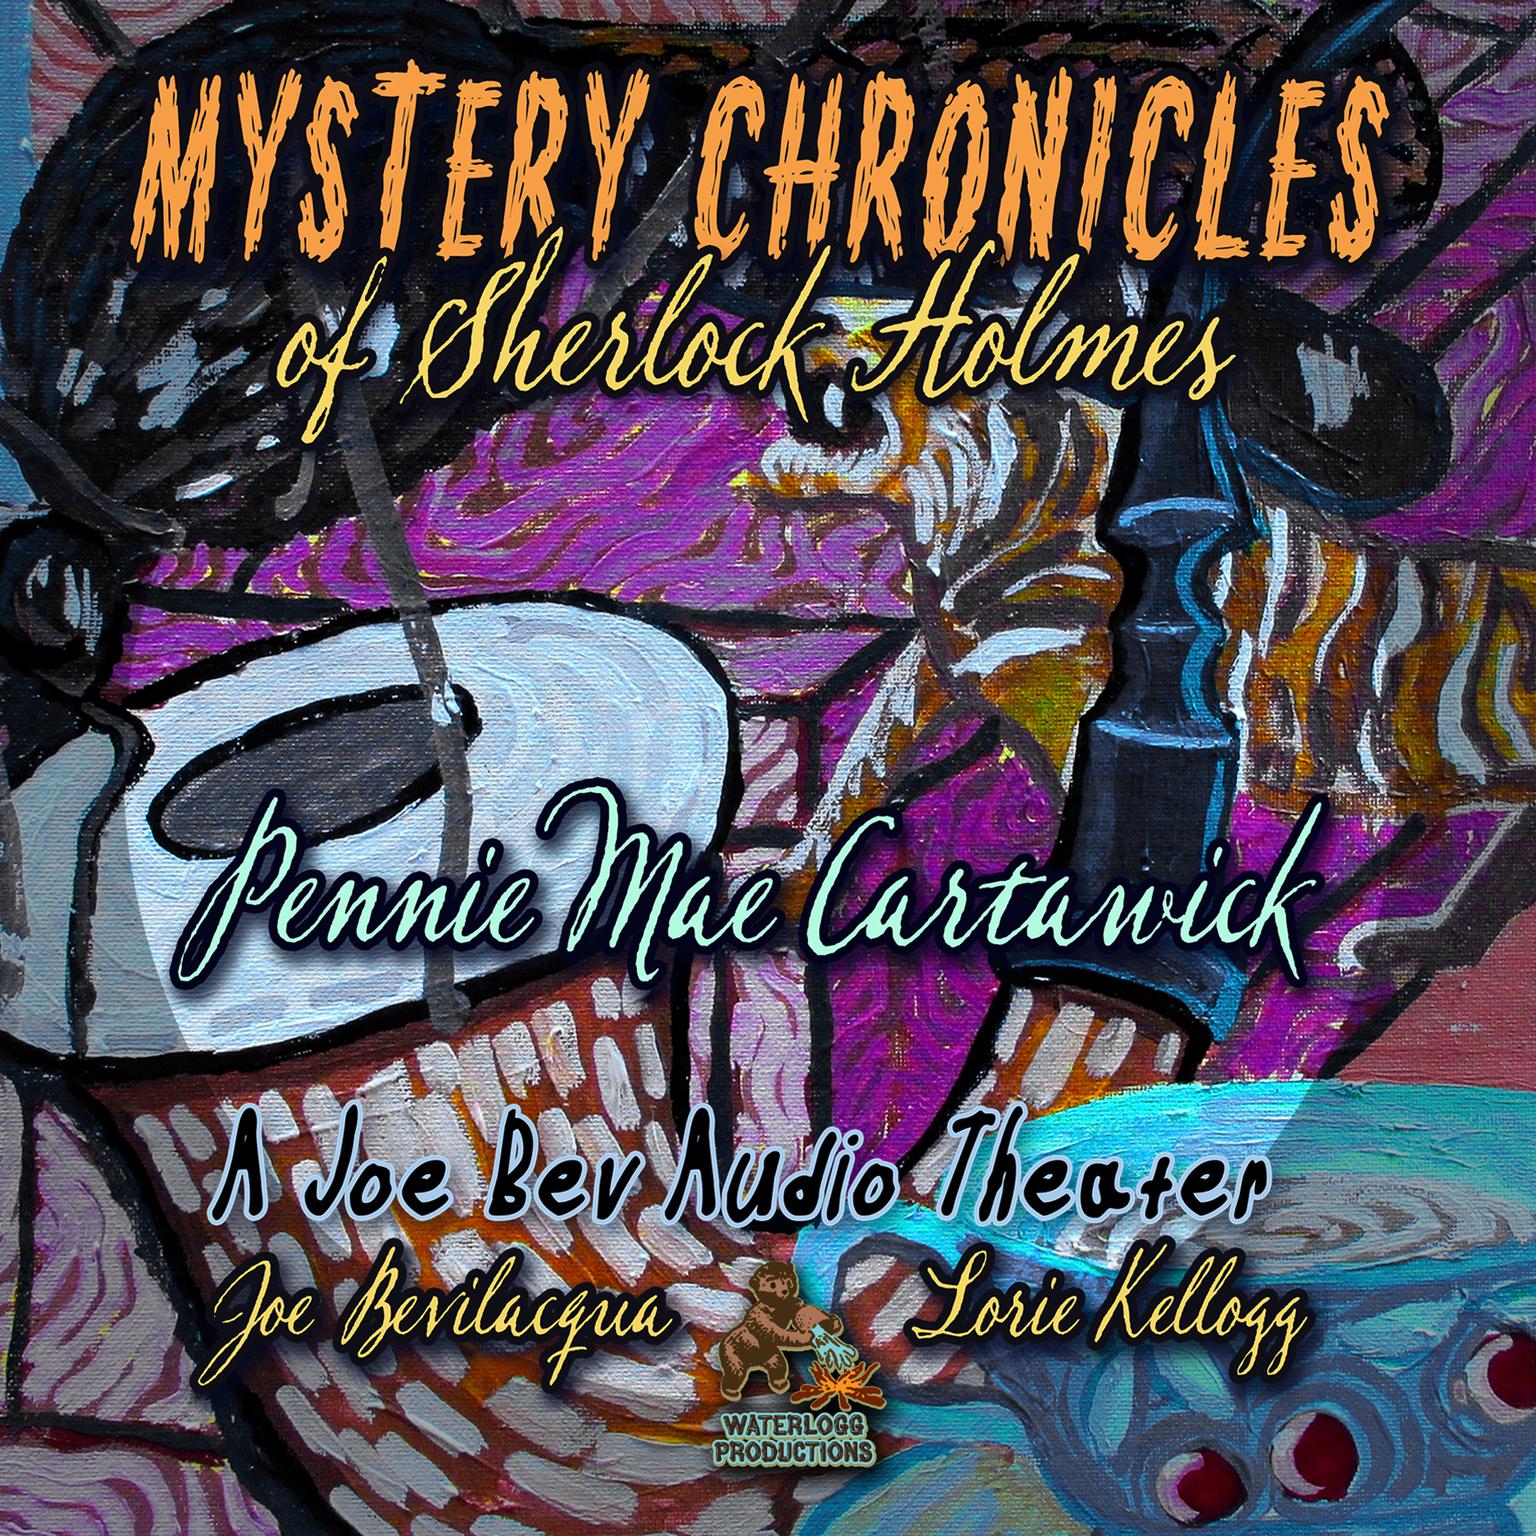 Mystery Chronicles of Sherlock Holmes, Extended Edition: A Quintet Collection of Short Stories Audiobook, by Pennie Mae Cartawick